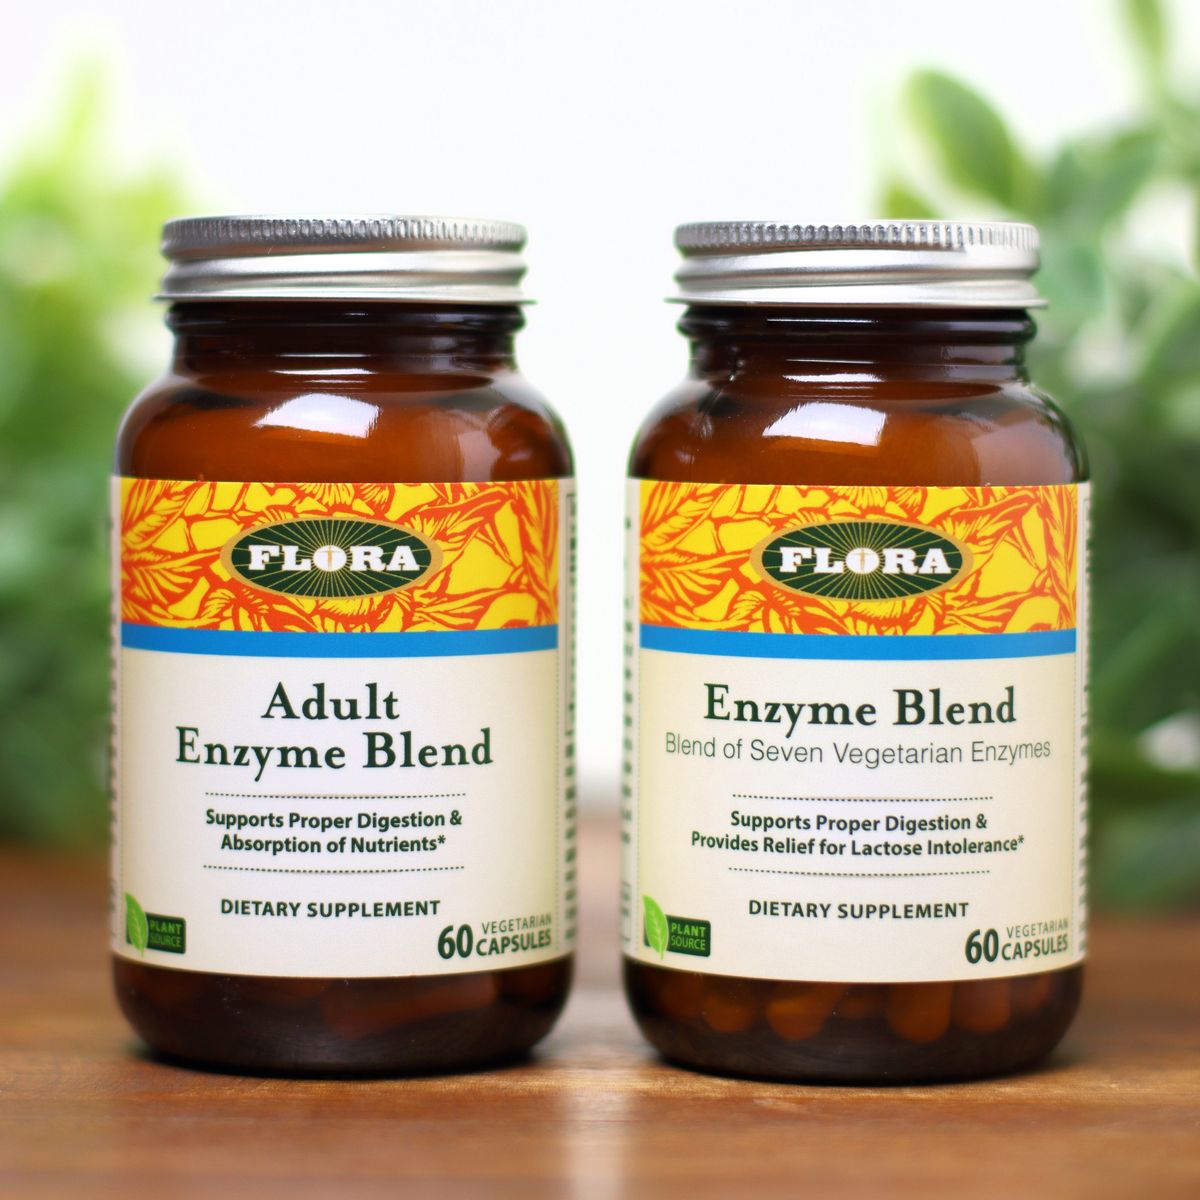 A bottle of Enzyme Blend and Advanced Adult Enzyme Blend from Flora